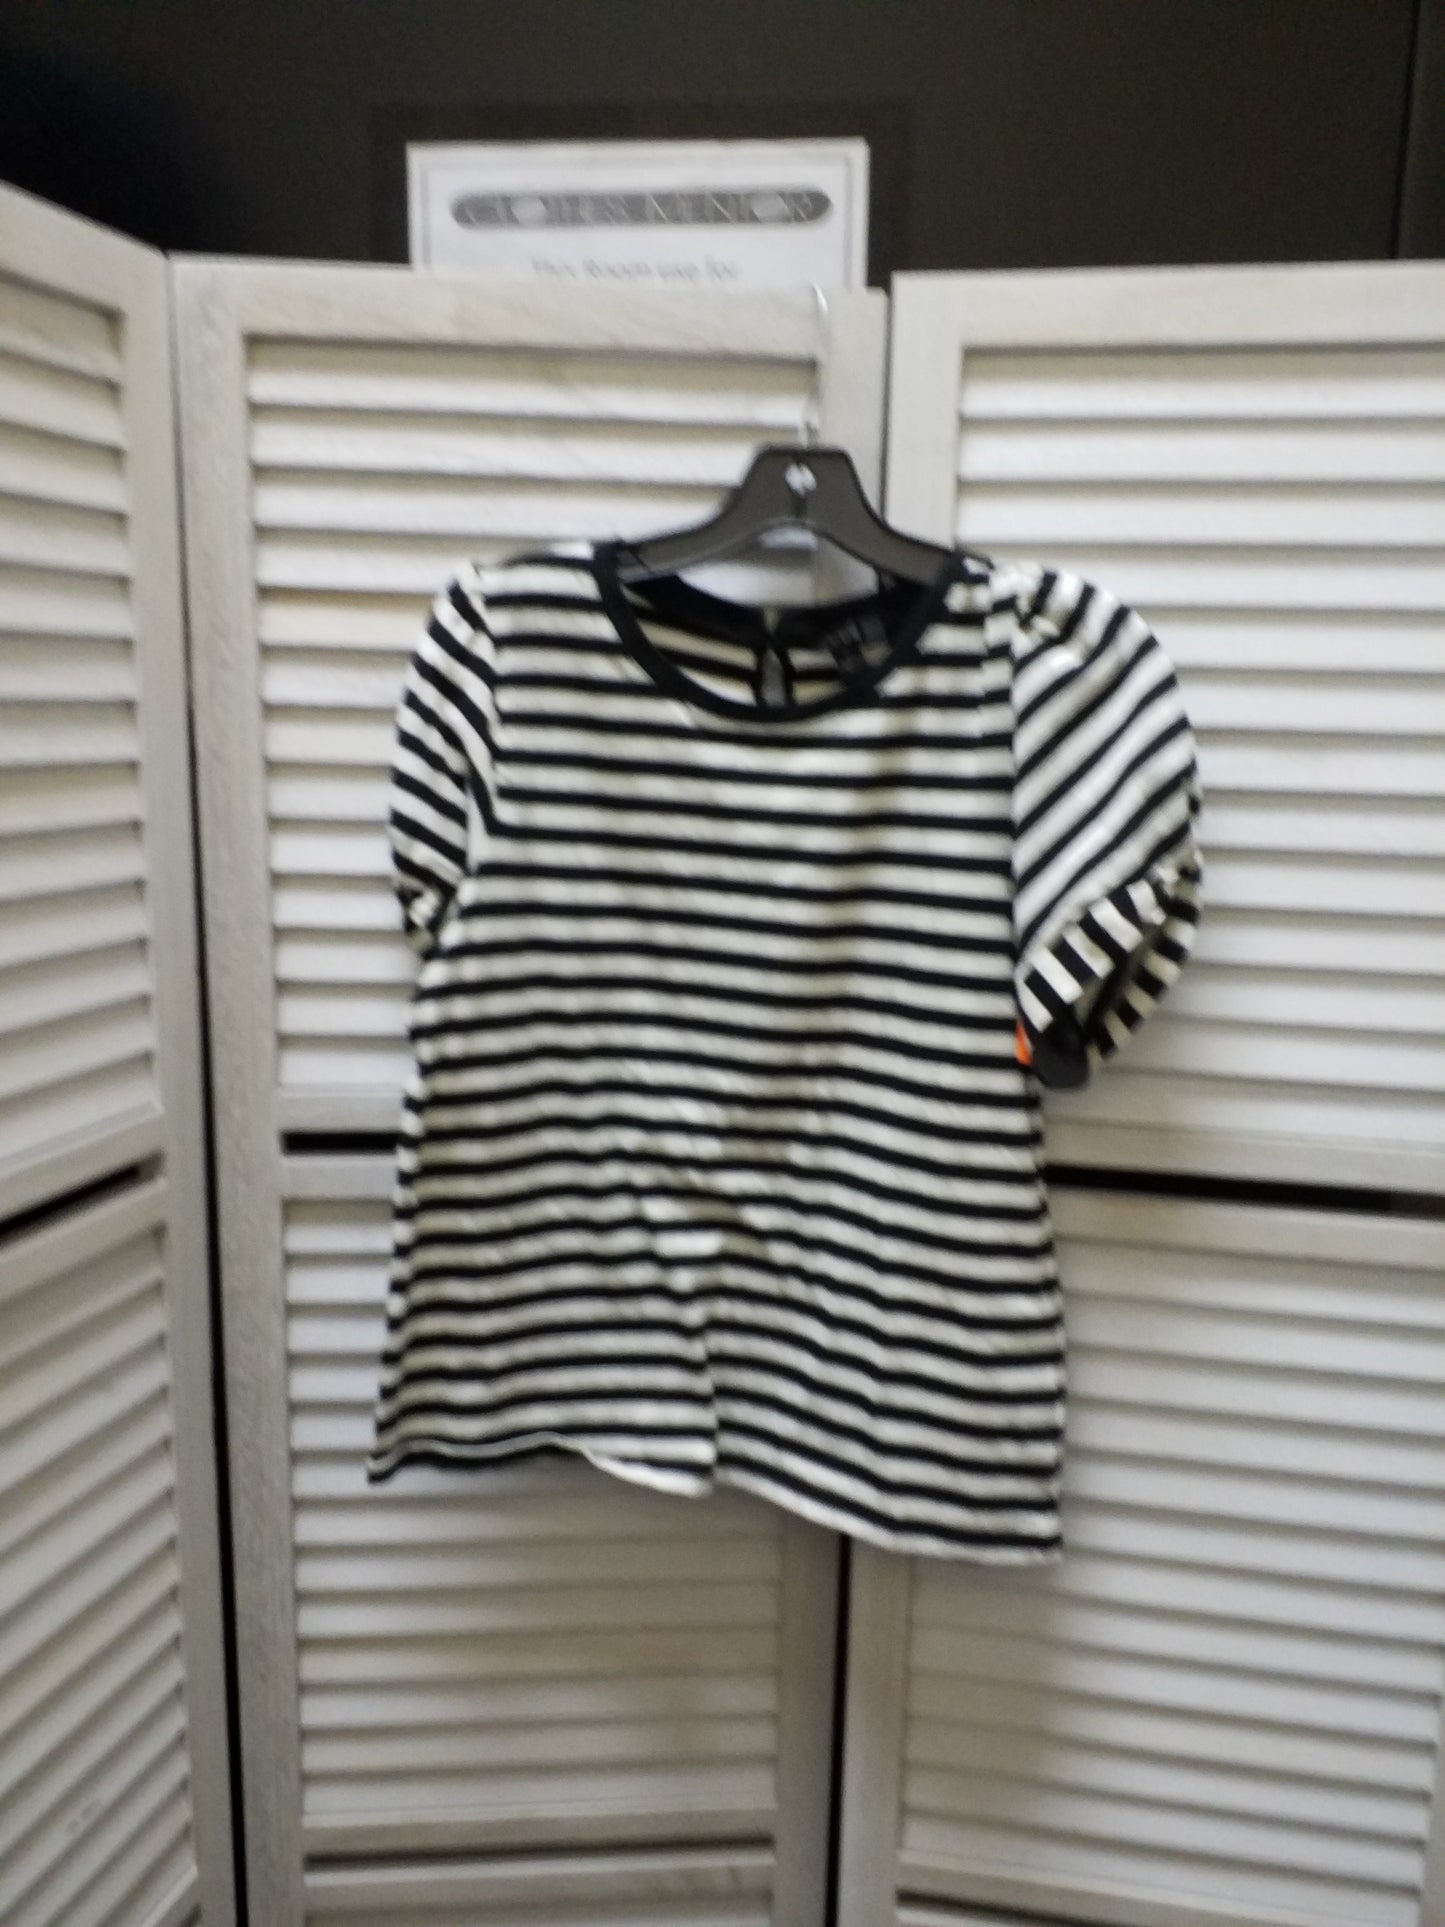 Top Short Sleeve By J Crew  Size: M